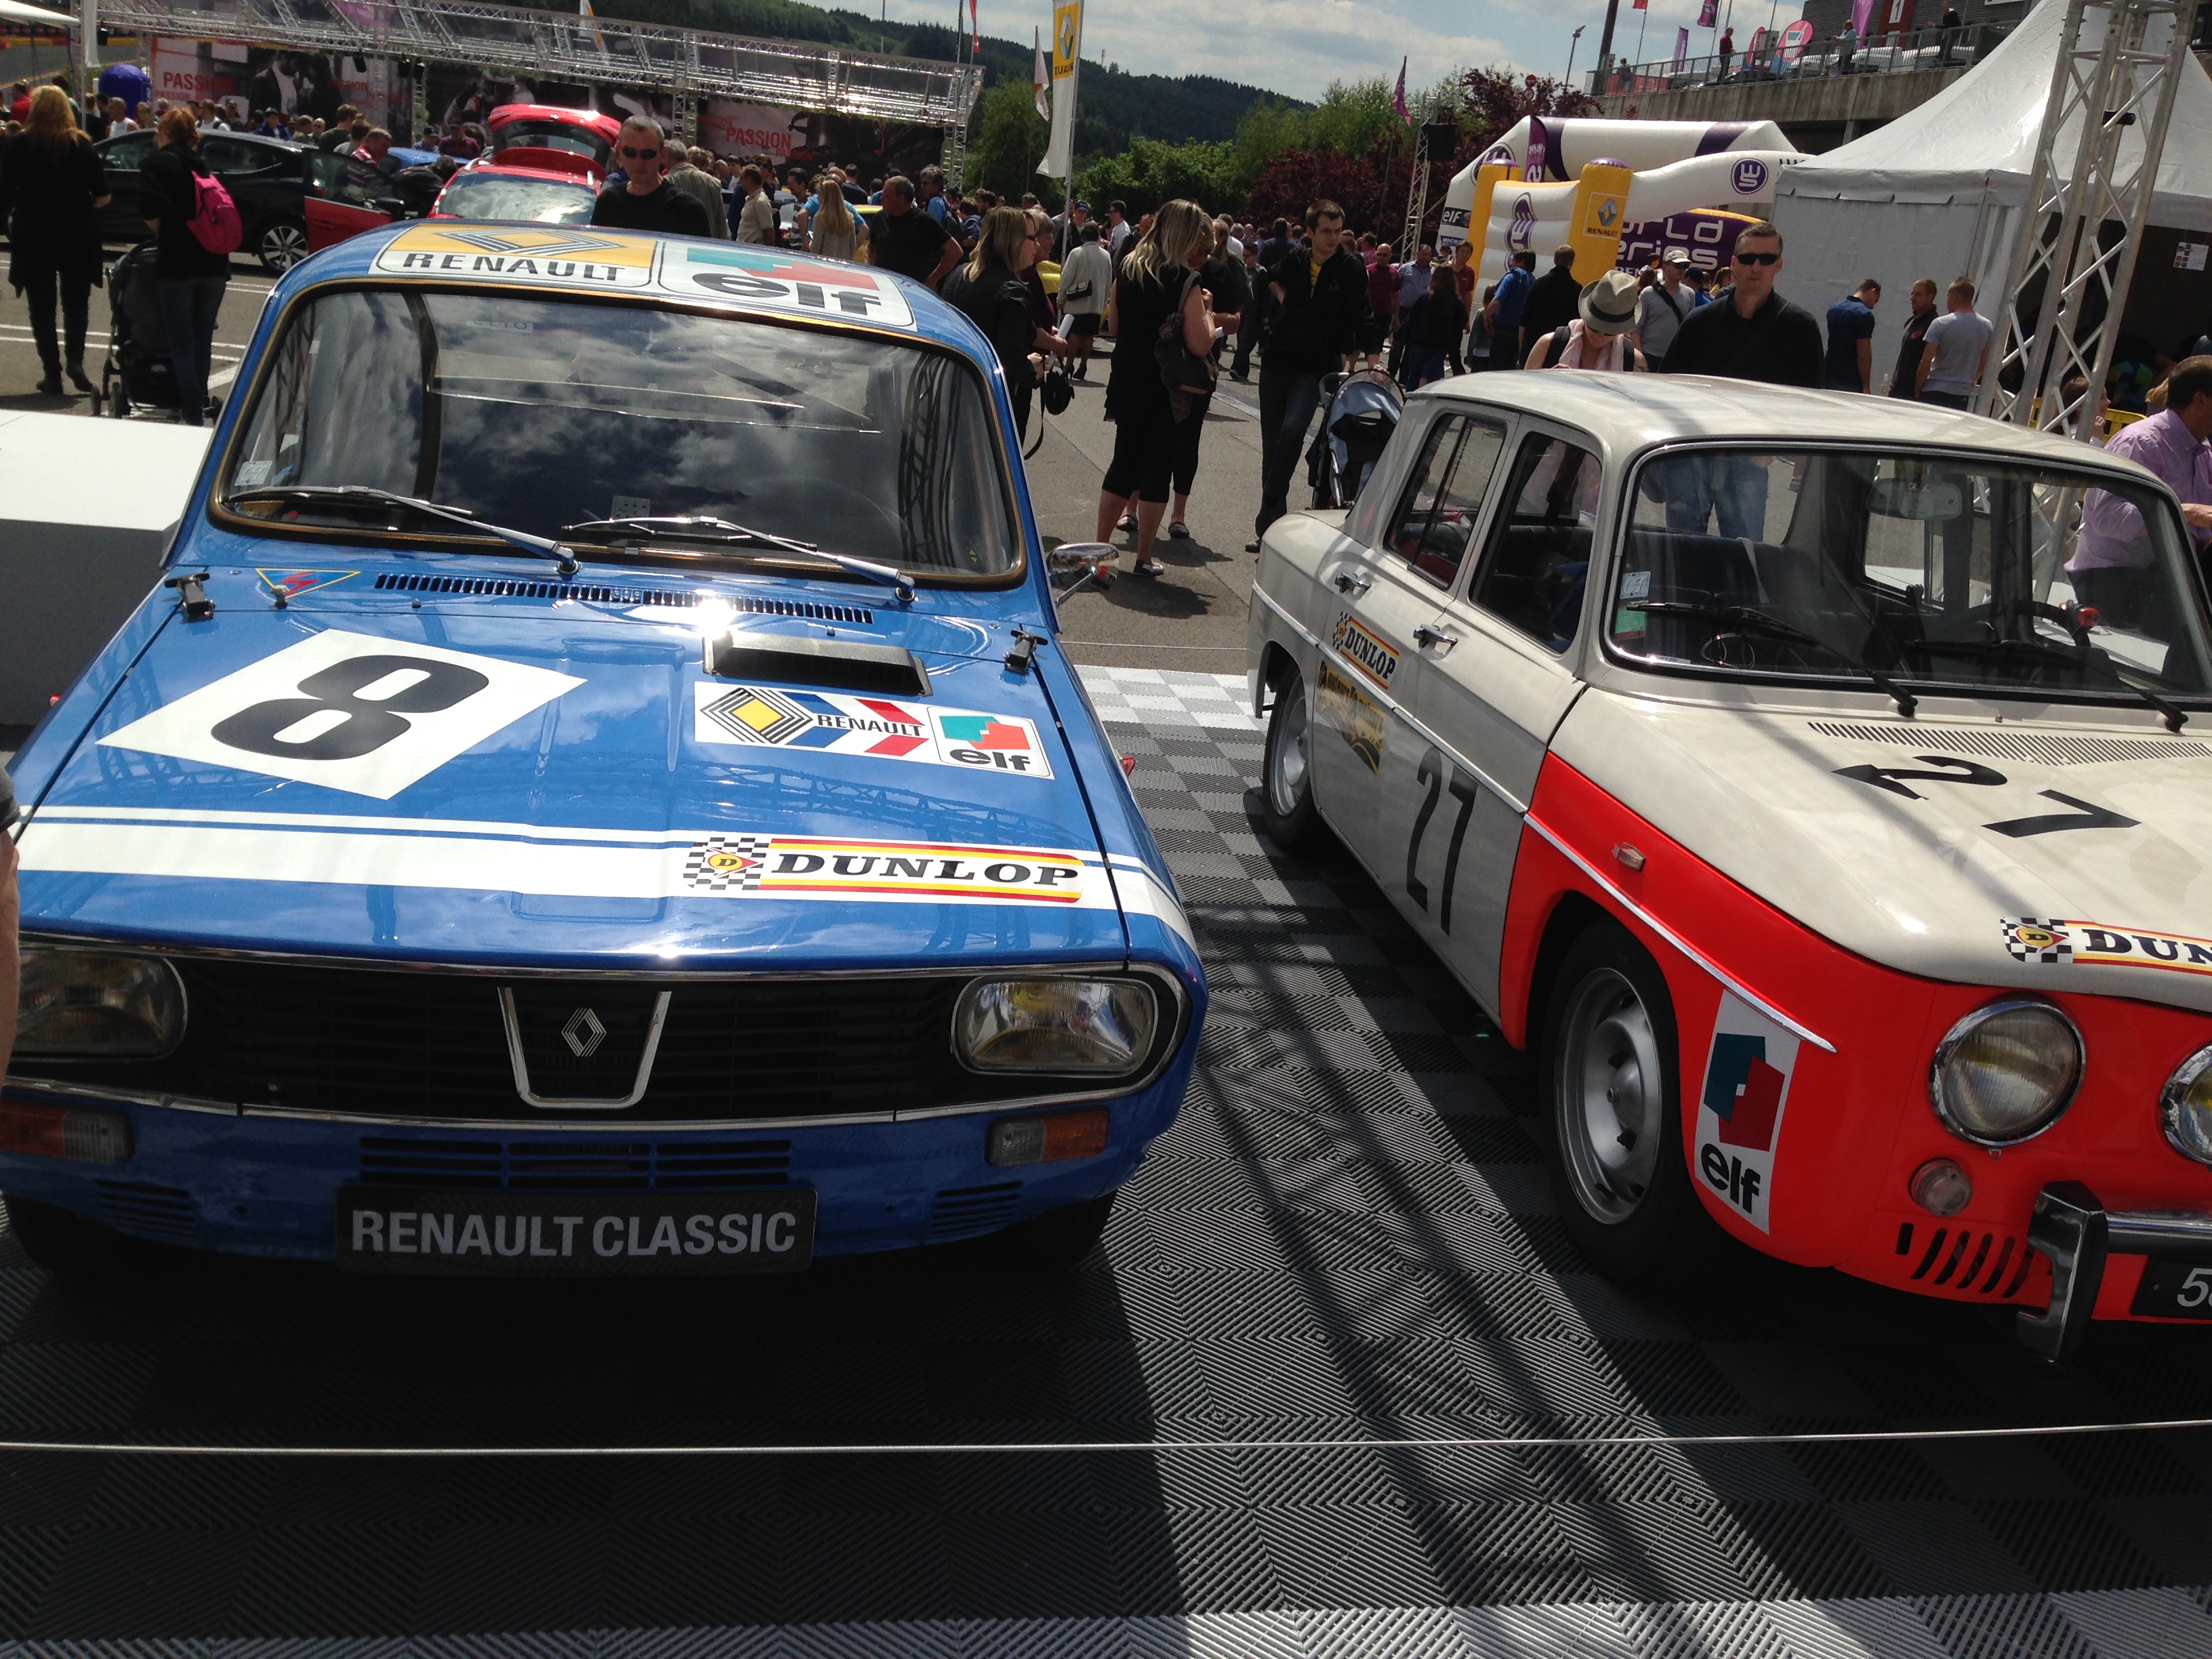 world serie by renault Spa le 30.31.1 juin 2014 14060110241817380112281624